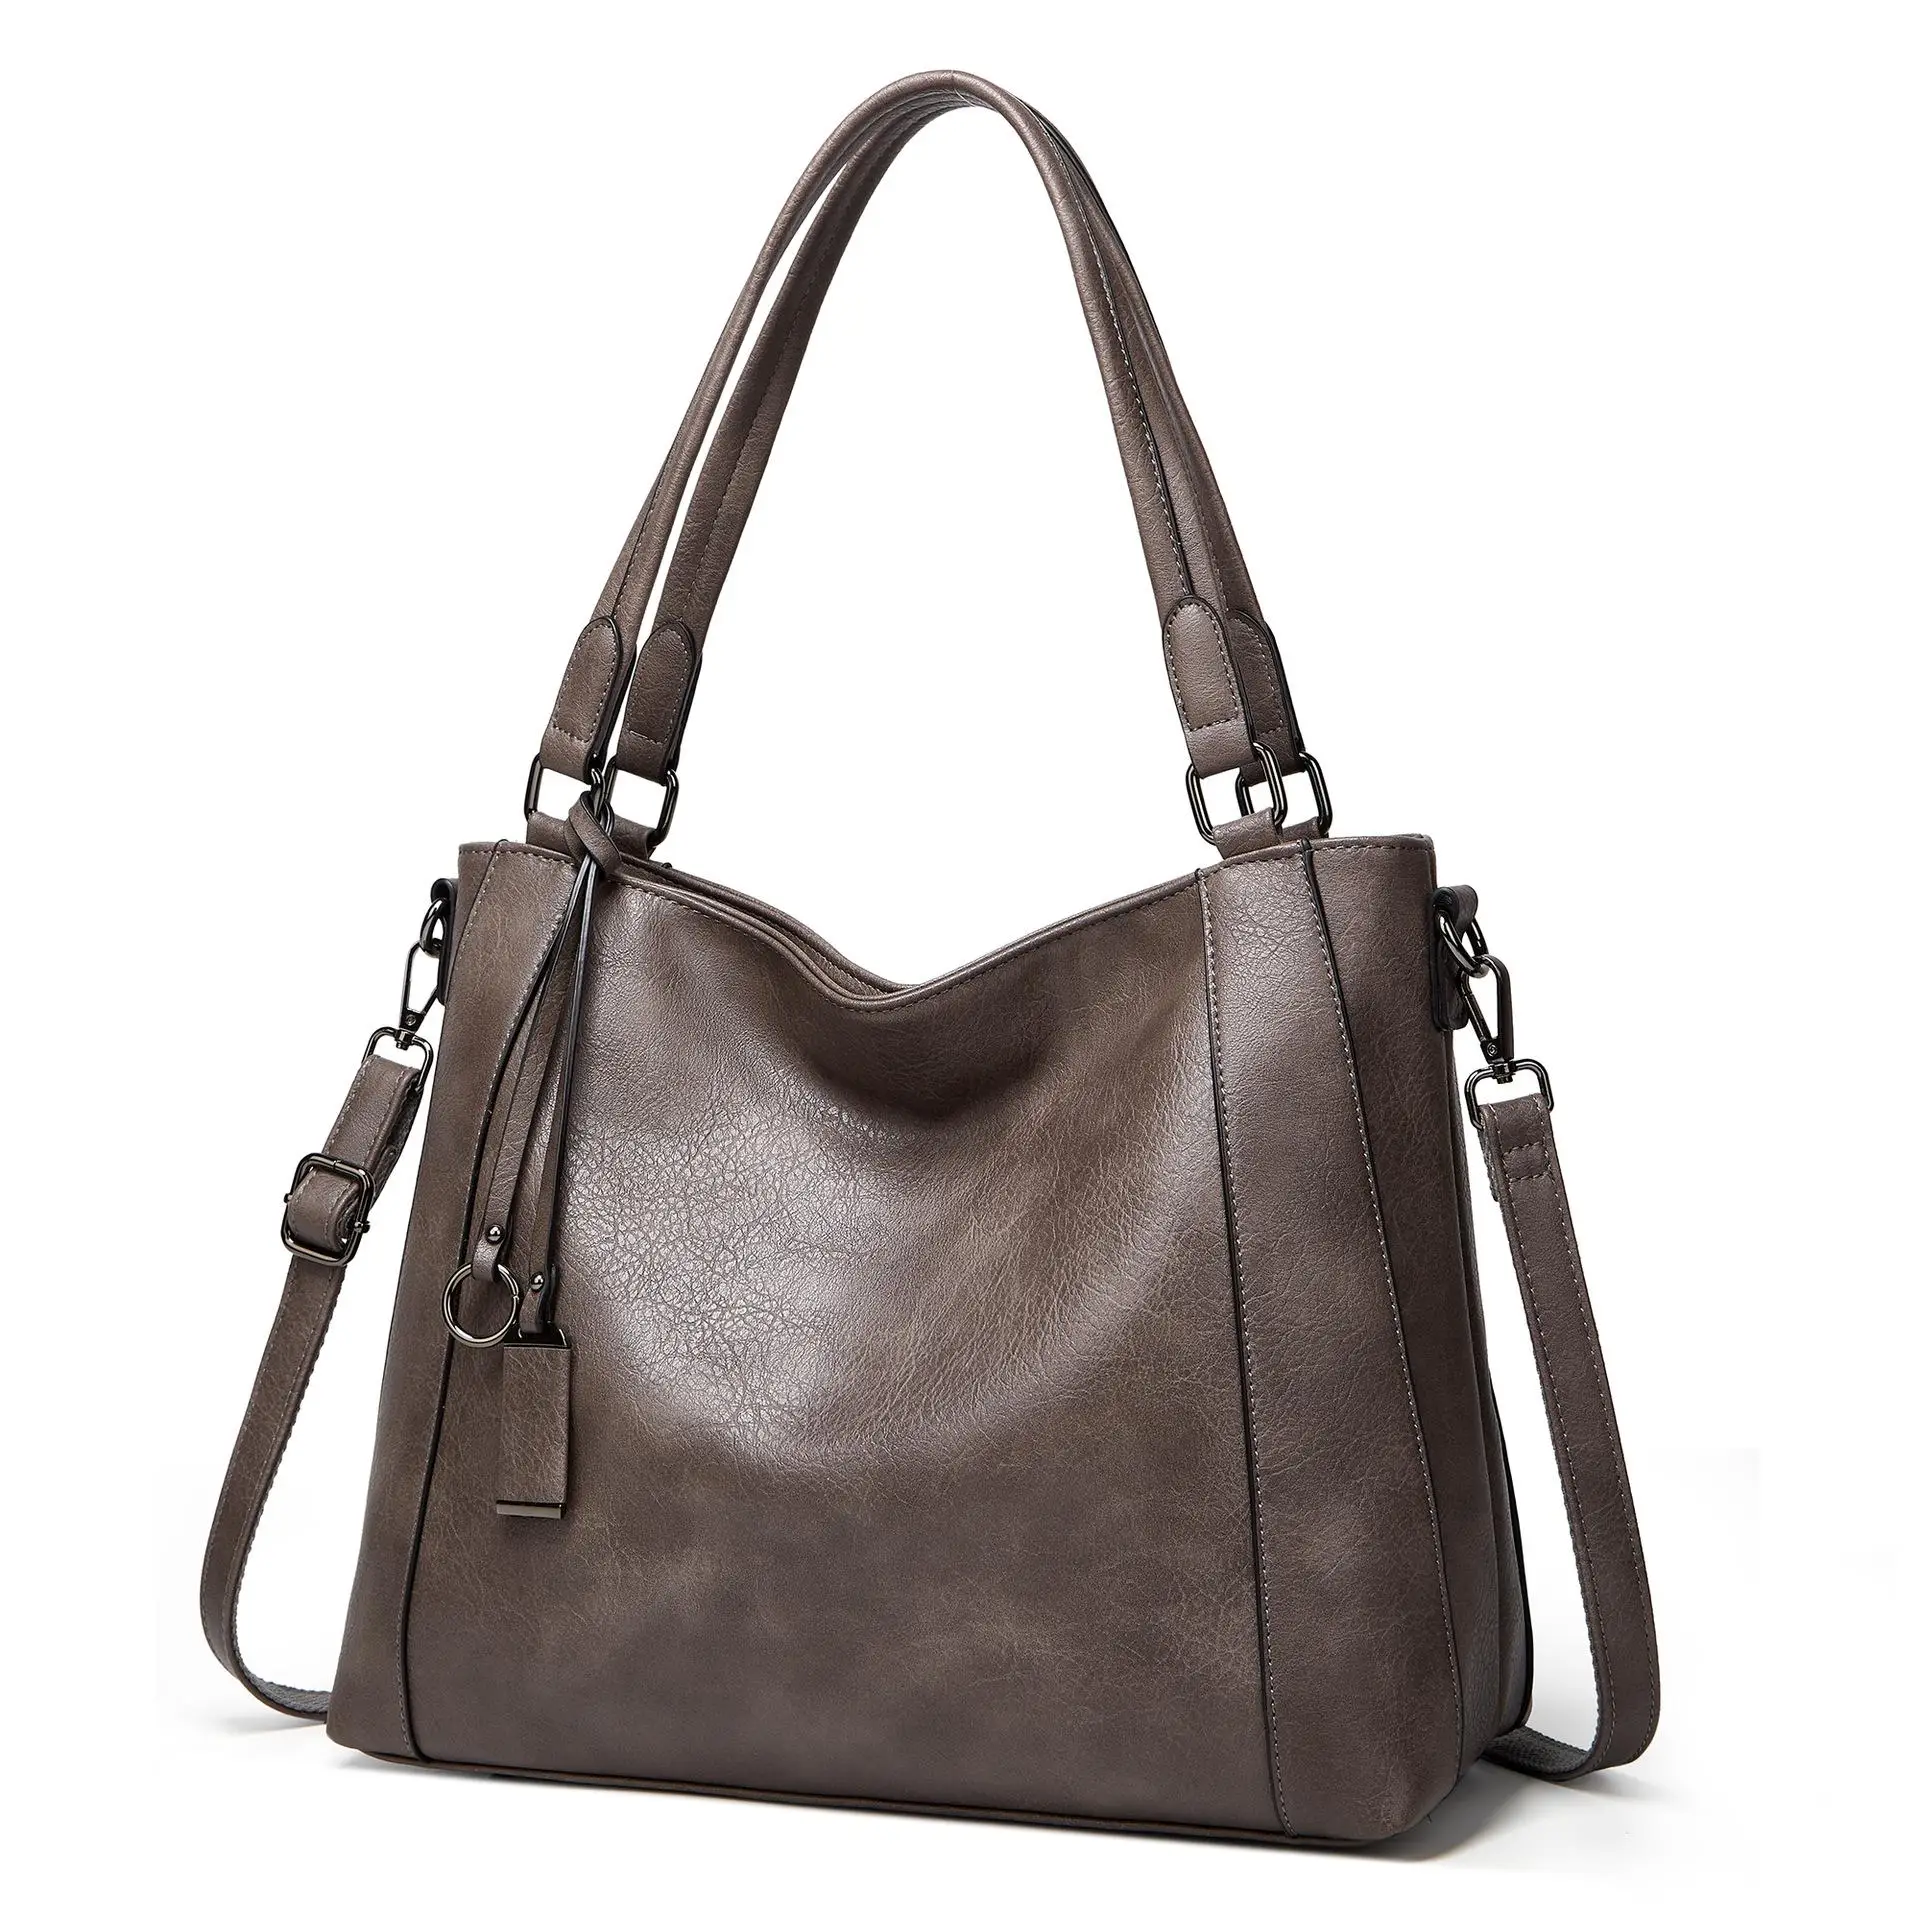 

New Style Women Handbag Leather Shoulder Contracted Bag Inclined Shoulder Bag Restoring Ancient Ways The High Quality